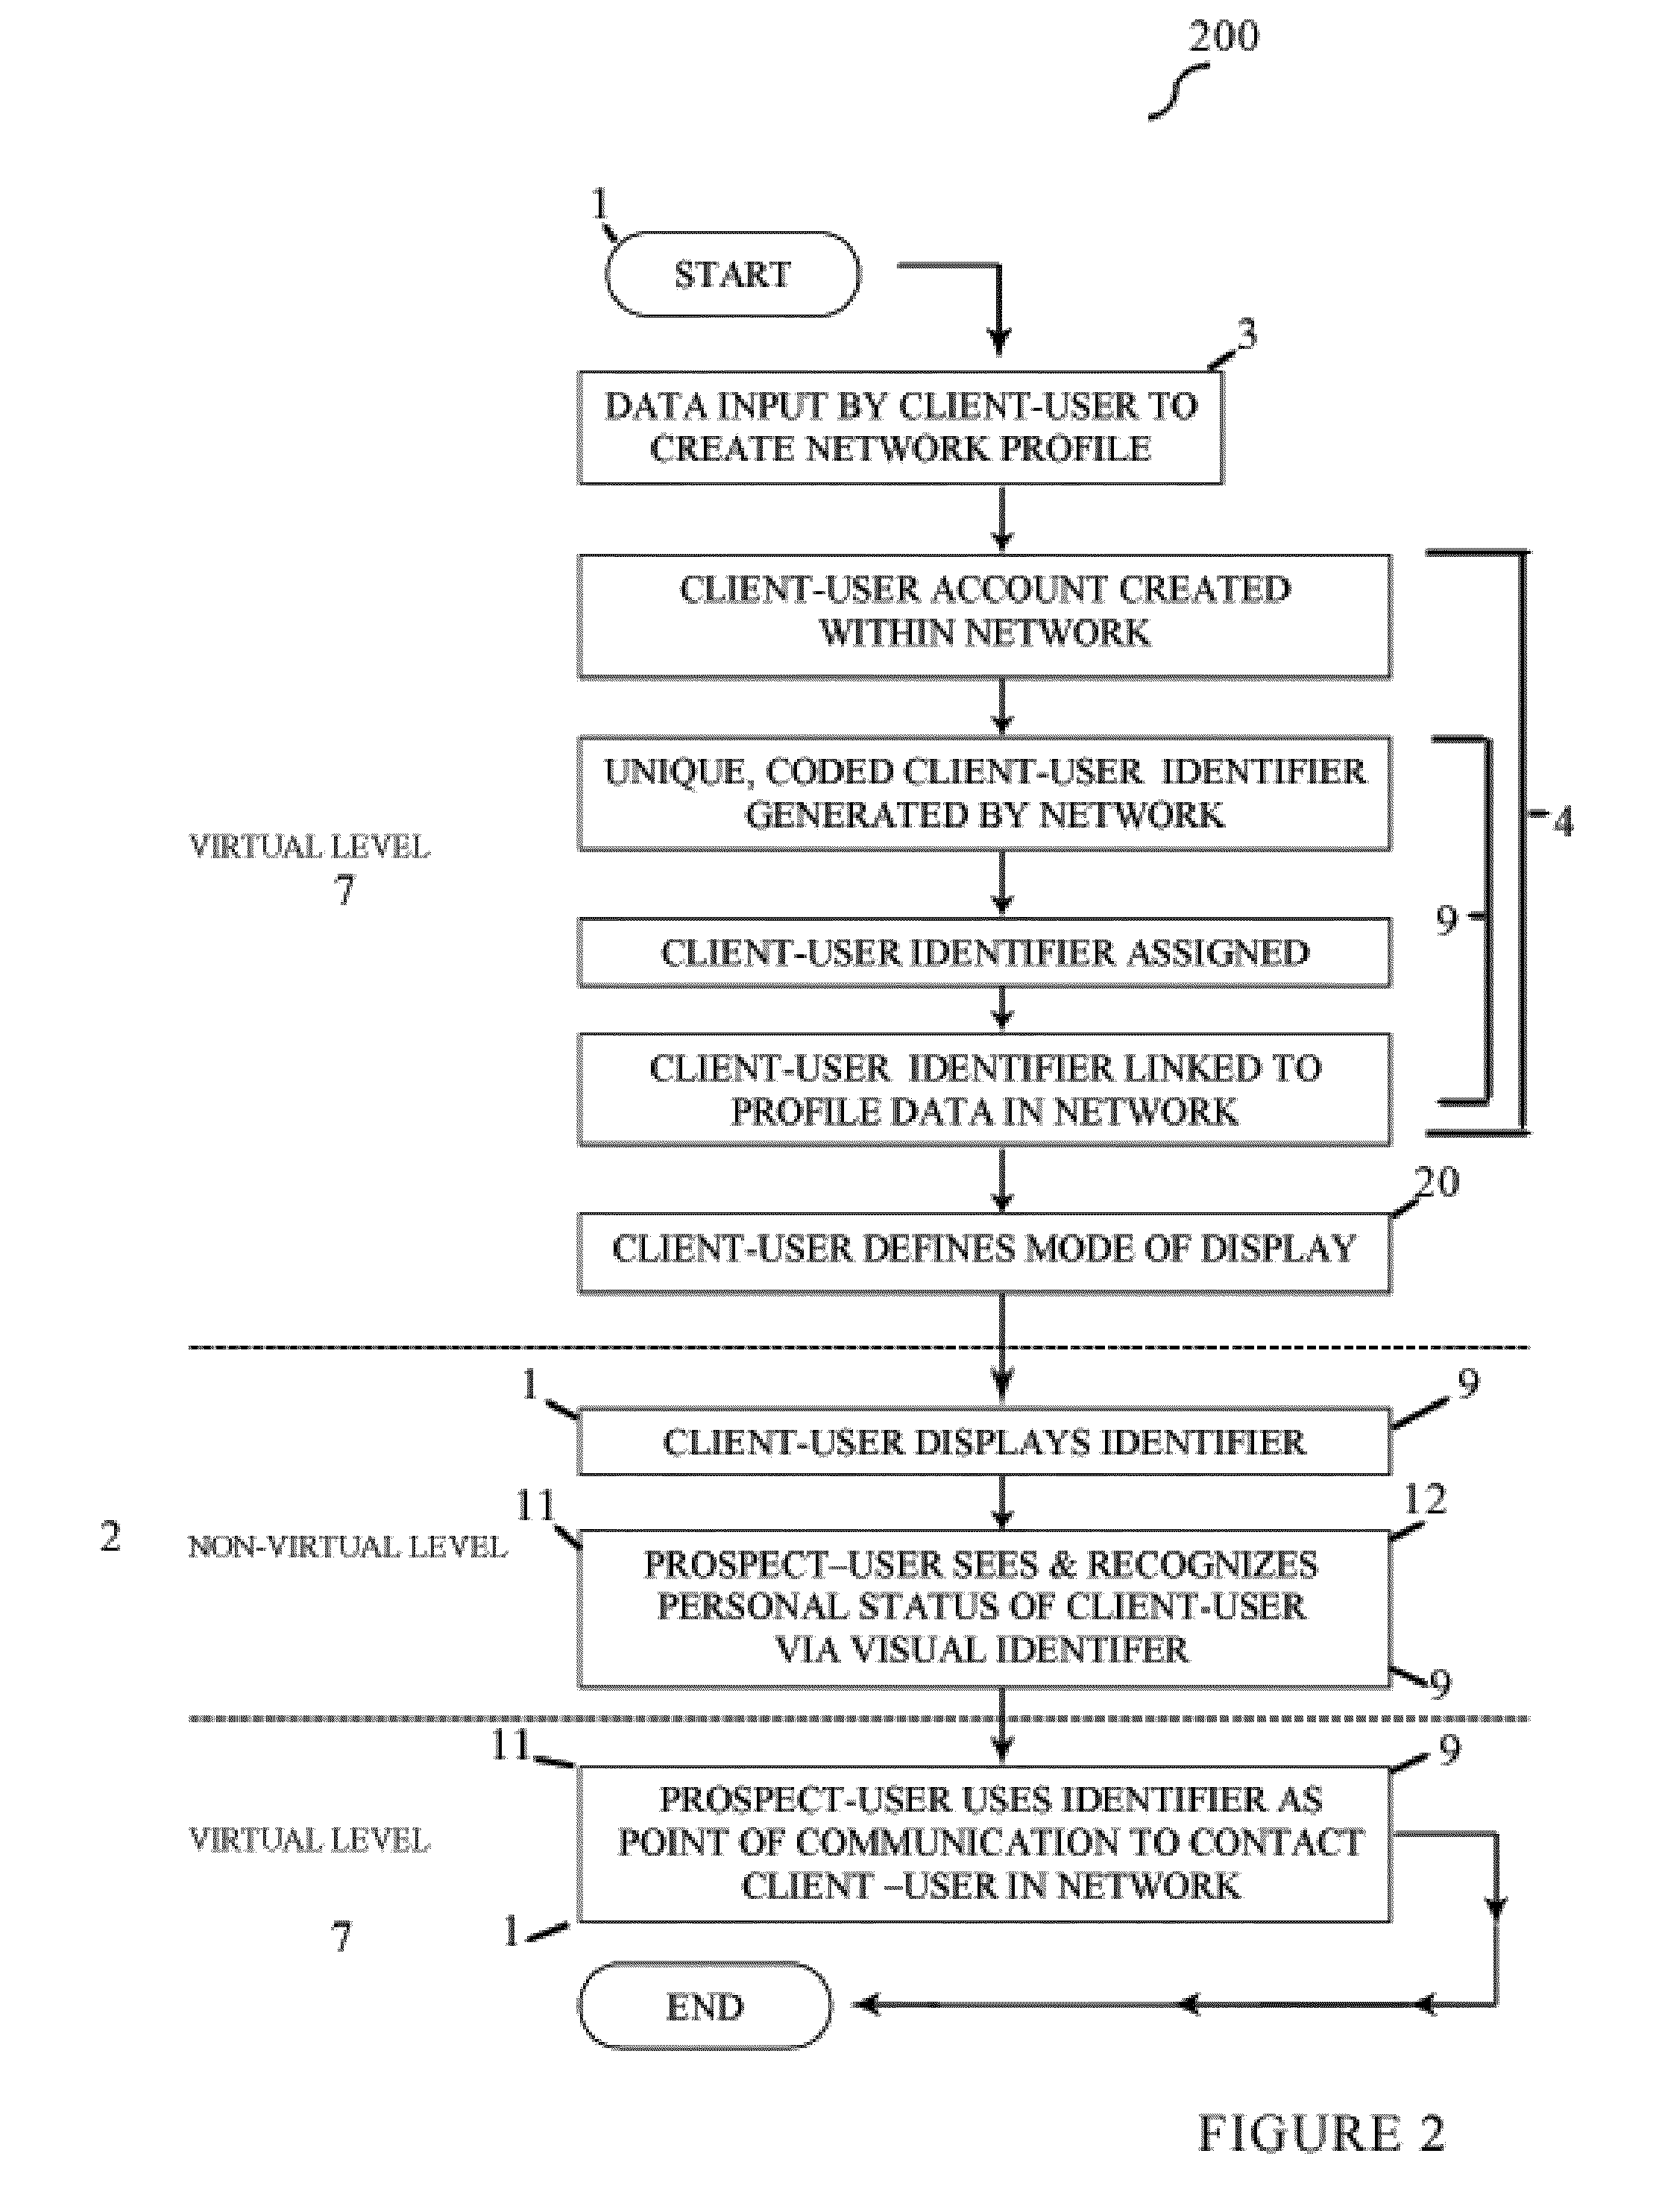 Method, apparatus and system of unique, coded, visual identifiers that provide a point of contact between people for communication and exchange of information bridging non-virtual and virtual environments